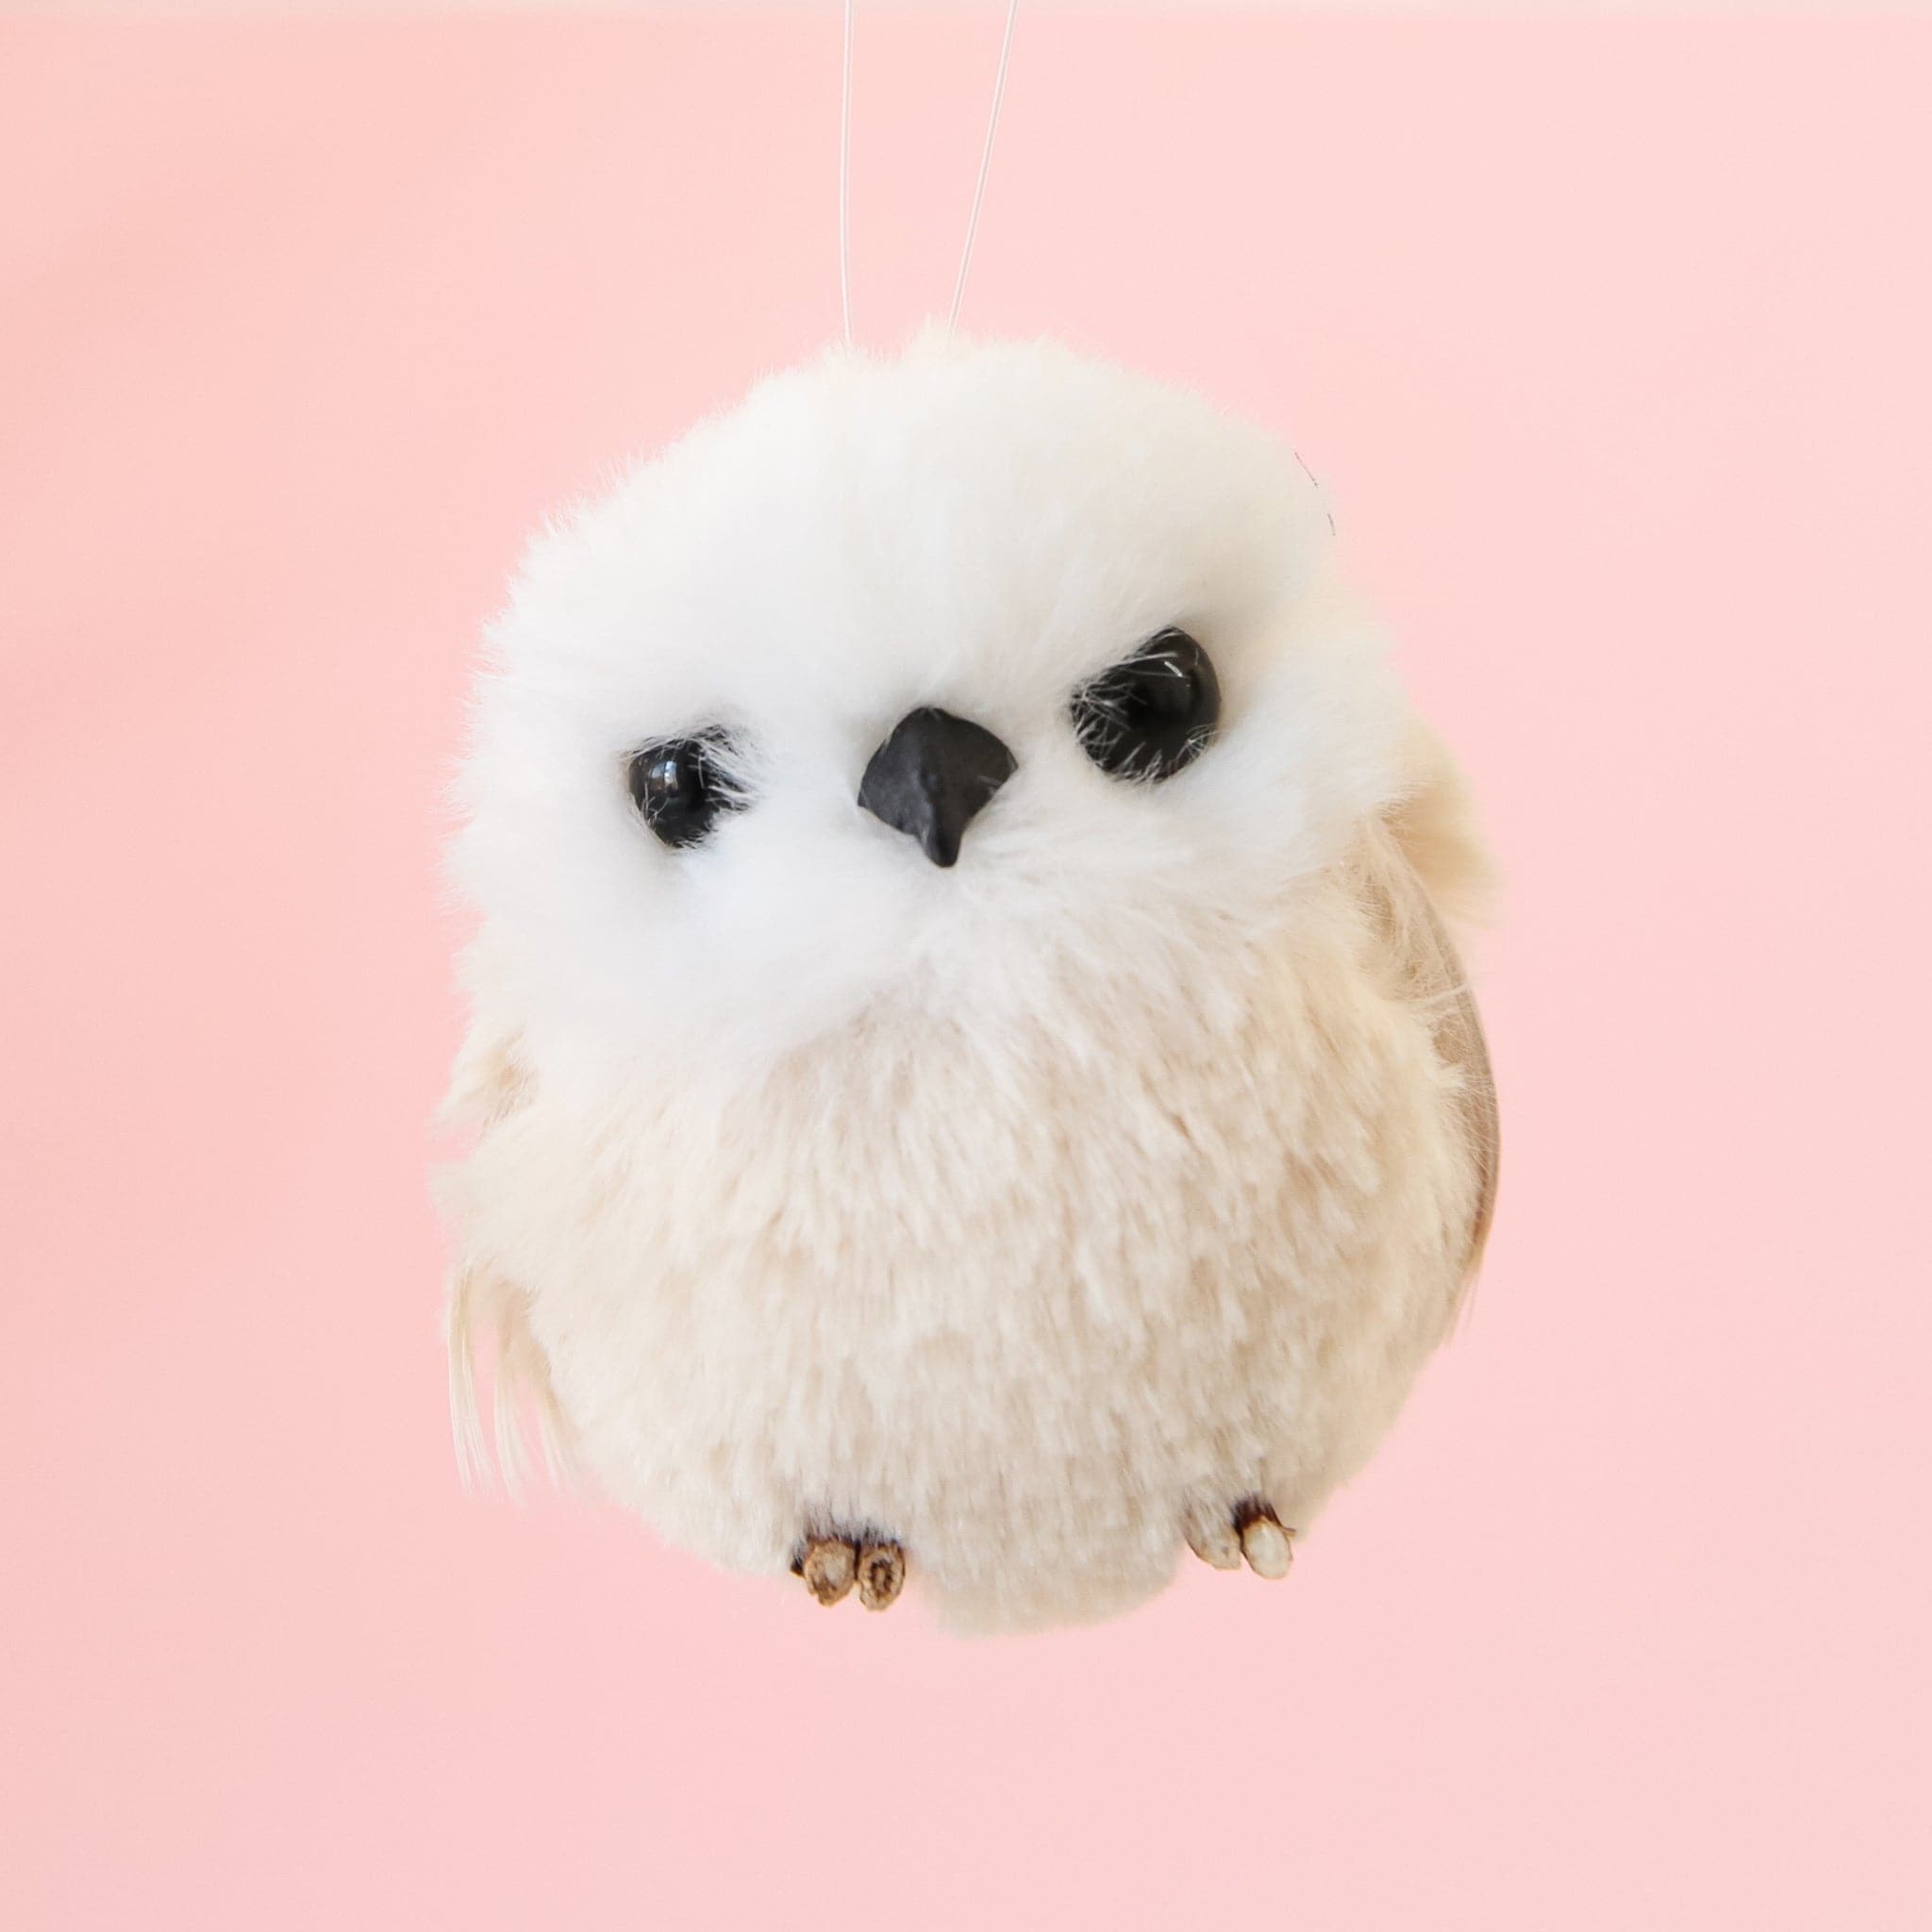 A round baby owl ornament with a black beak and black eyes and a cream colored body.